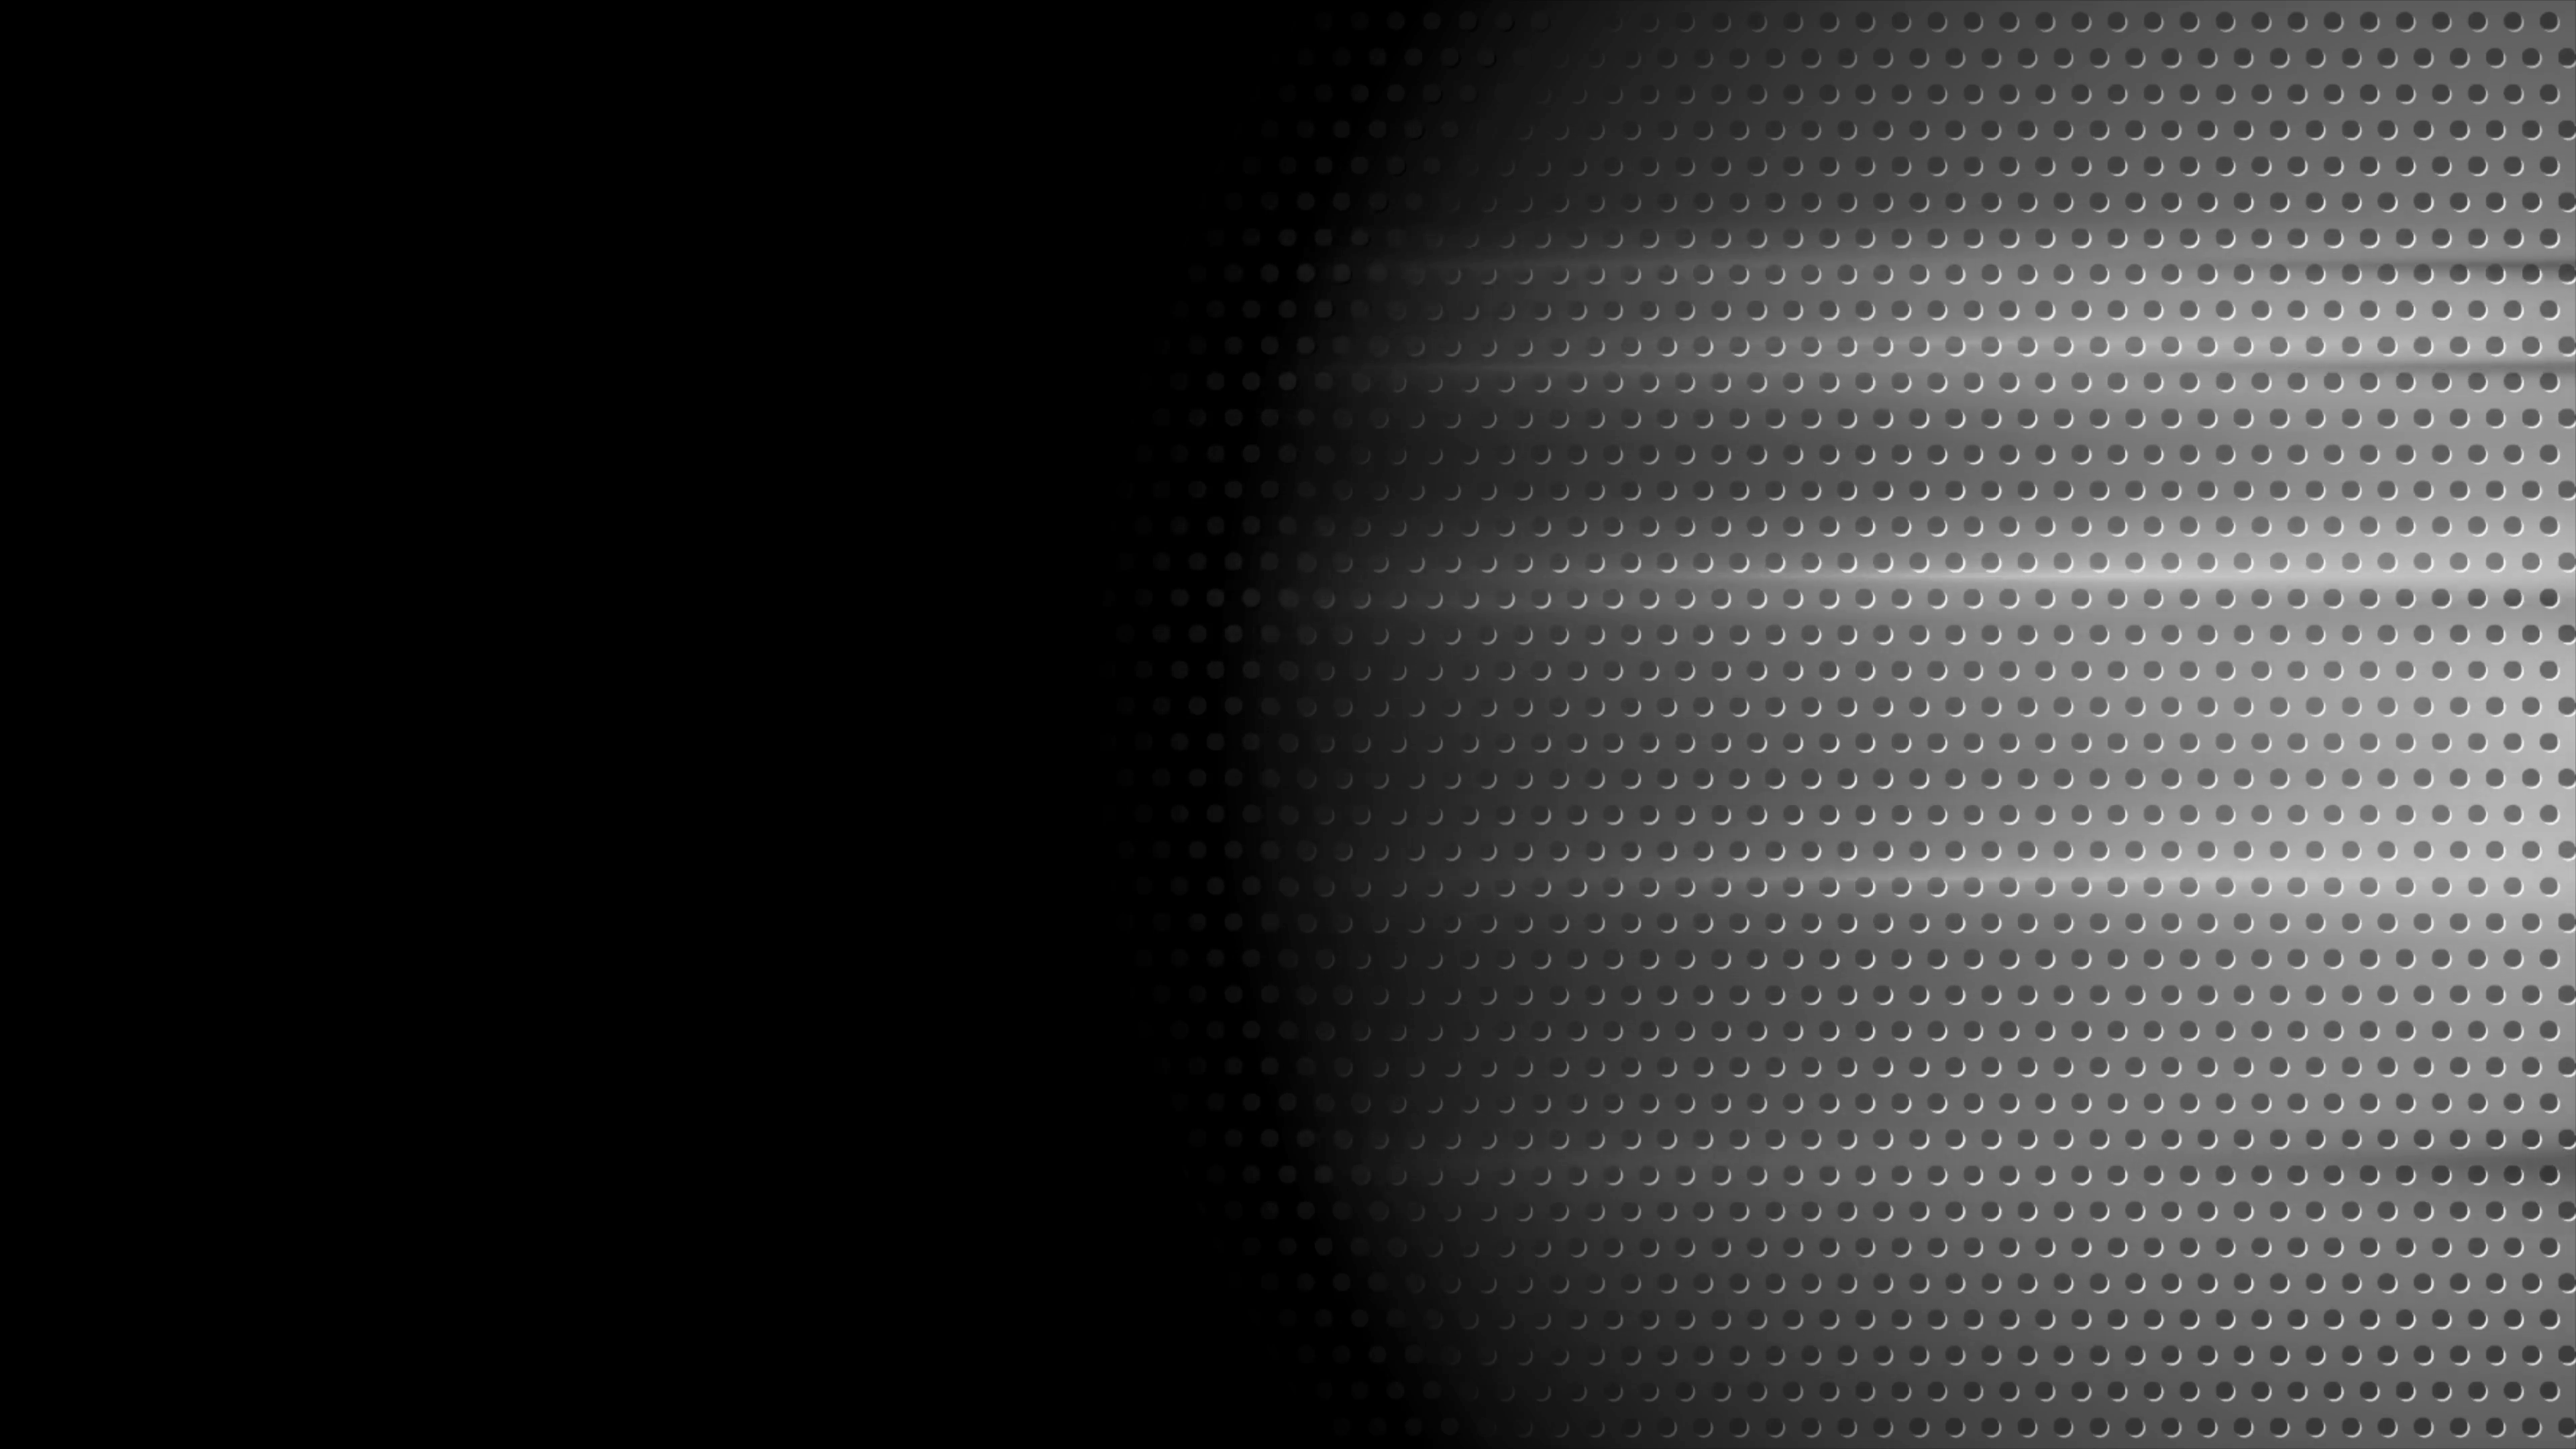 Chrome perforated metal texture motion background. Seamless loop